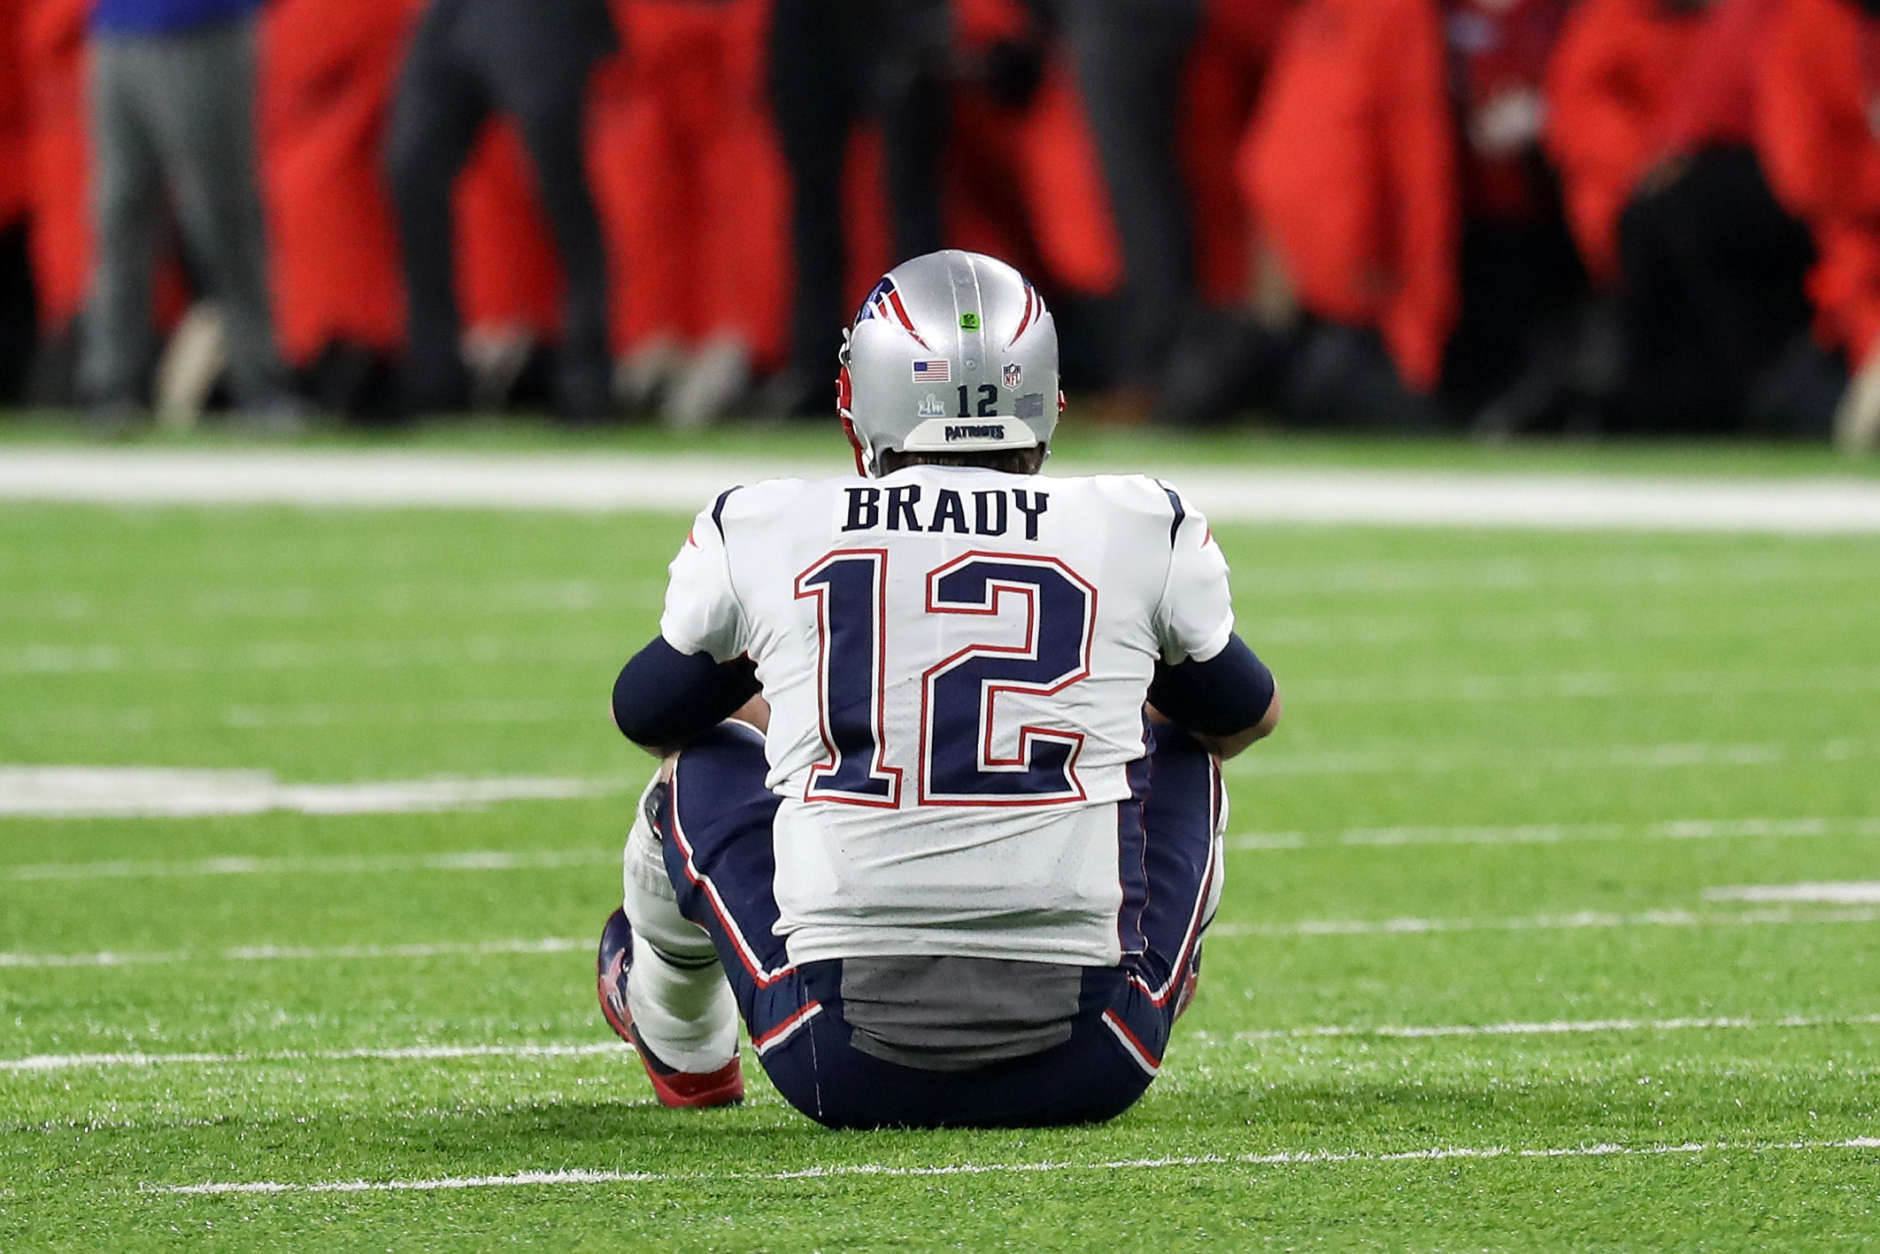 MINNEAPOLIS, MN - FEBRUARY 04:  Tom Brady #12 of the New England Patriots reacts after fumbling the ball during the fourth quarter against the Philadelphia Eagles in Super Bowl LII at U.S. Bank Stadium on February 4, 2018 in Minneapolis, Minnesota.The Philadelphia Eagles defeated the New England Patriots 41-33.  (Photo by Rob Carr/Getty Images)